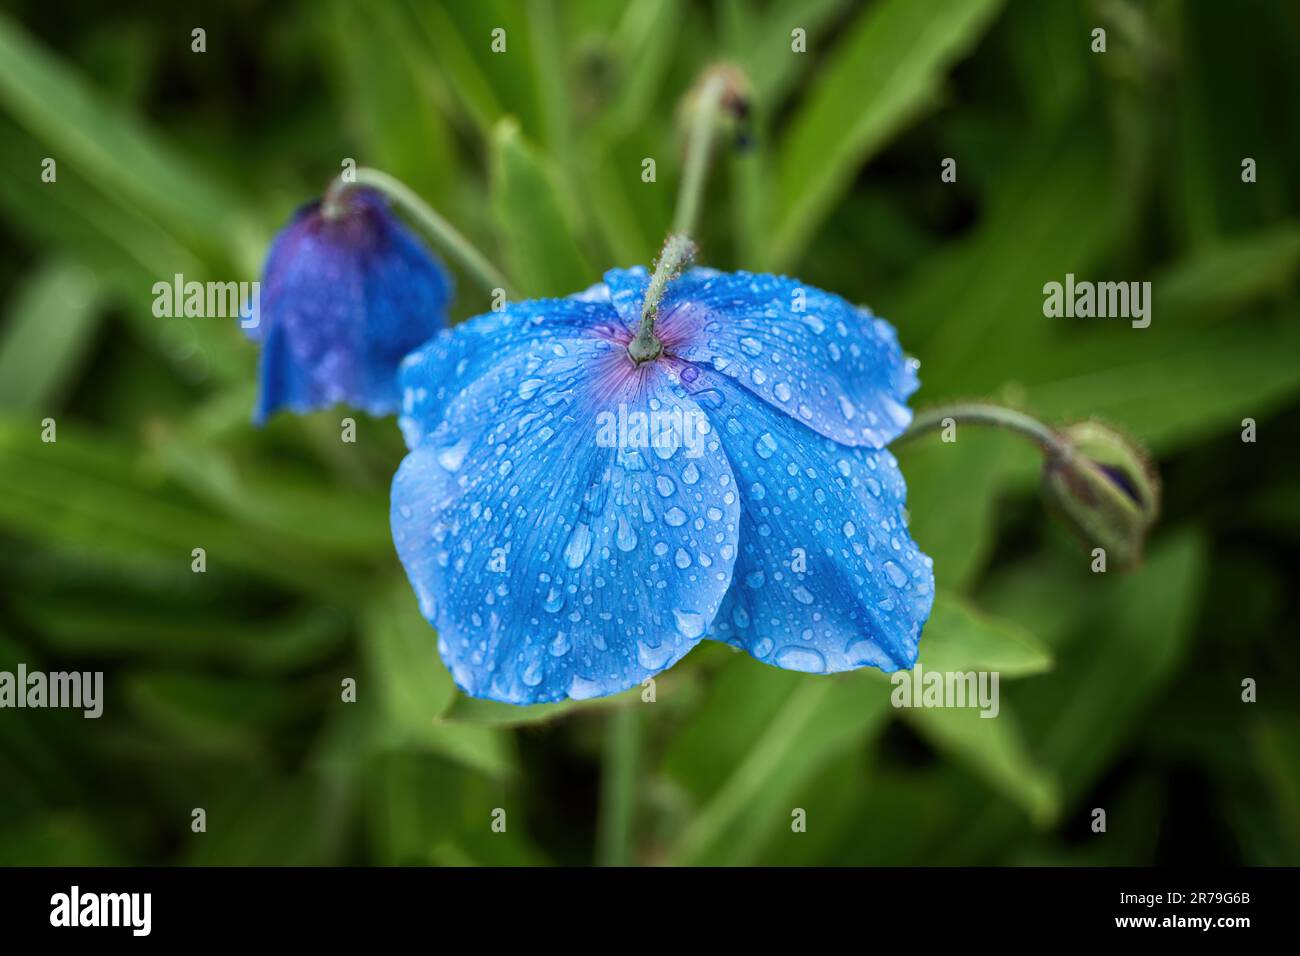 Meconopsis Slieve Donard or Himalayan Blue Poppy blooming flower with rain droplets and shallow depth of field, flowering plant in the family Papavera Stock Photo